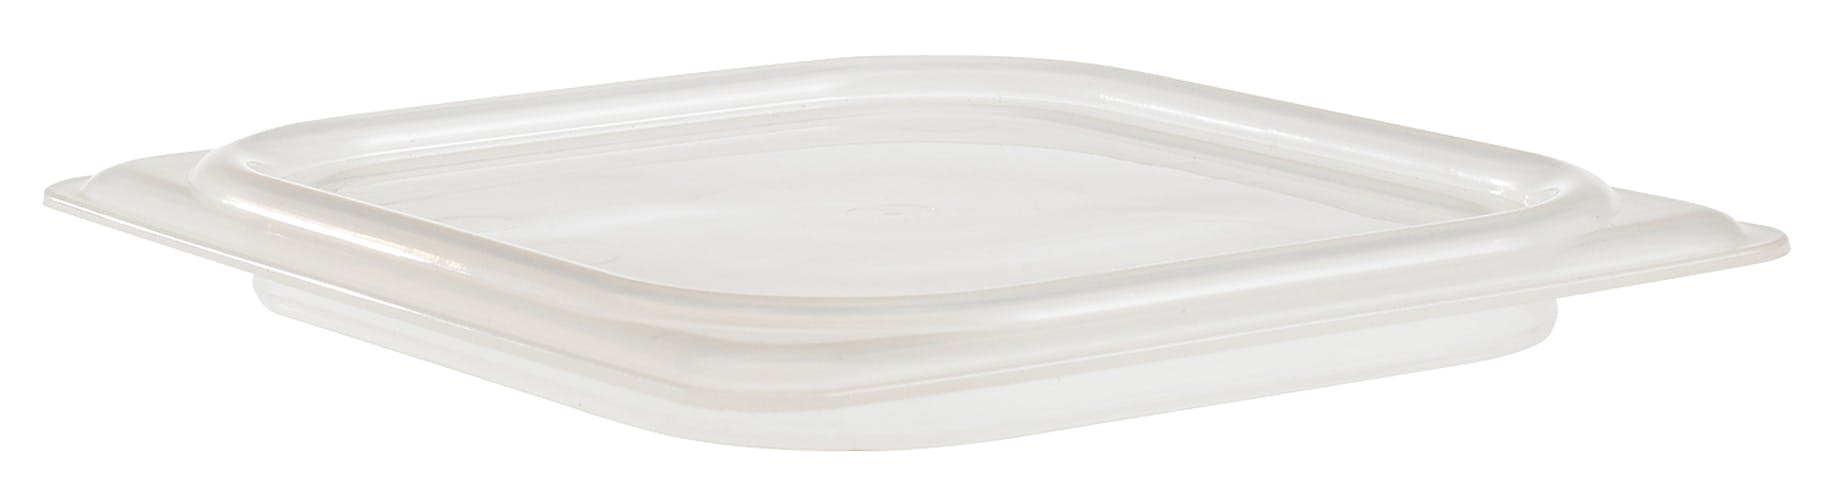 60PPCWSC190 Sixth Size Seal Cover for Food Pans